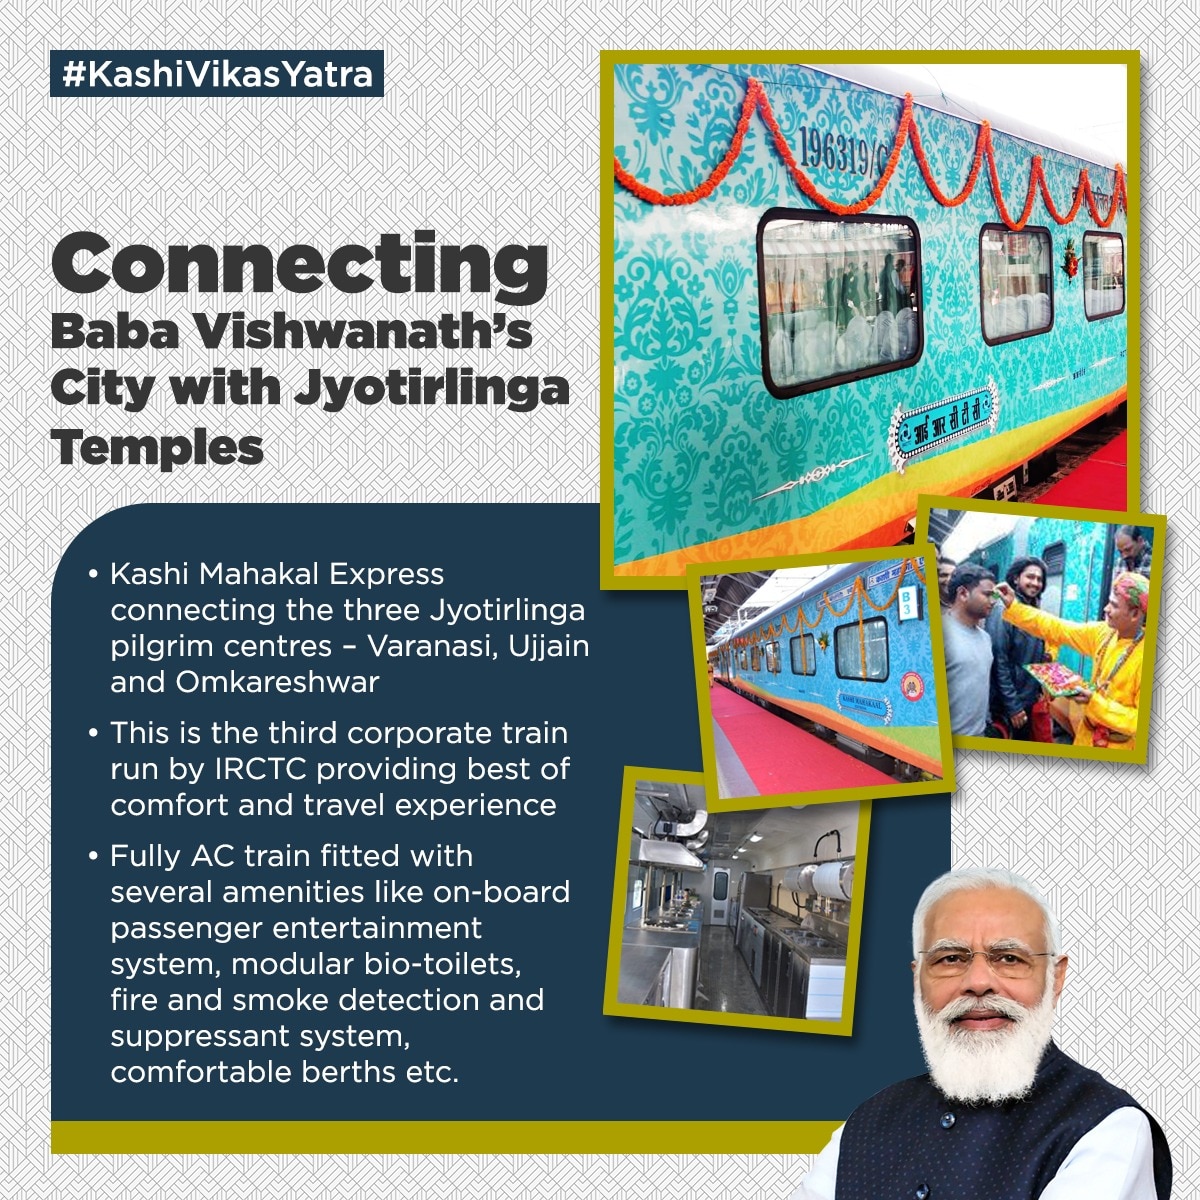 Connecting Baba Viswanath’s City with Jyothirlinga Temples